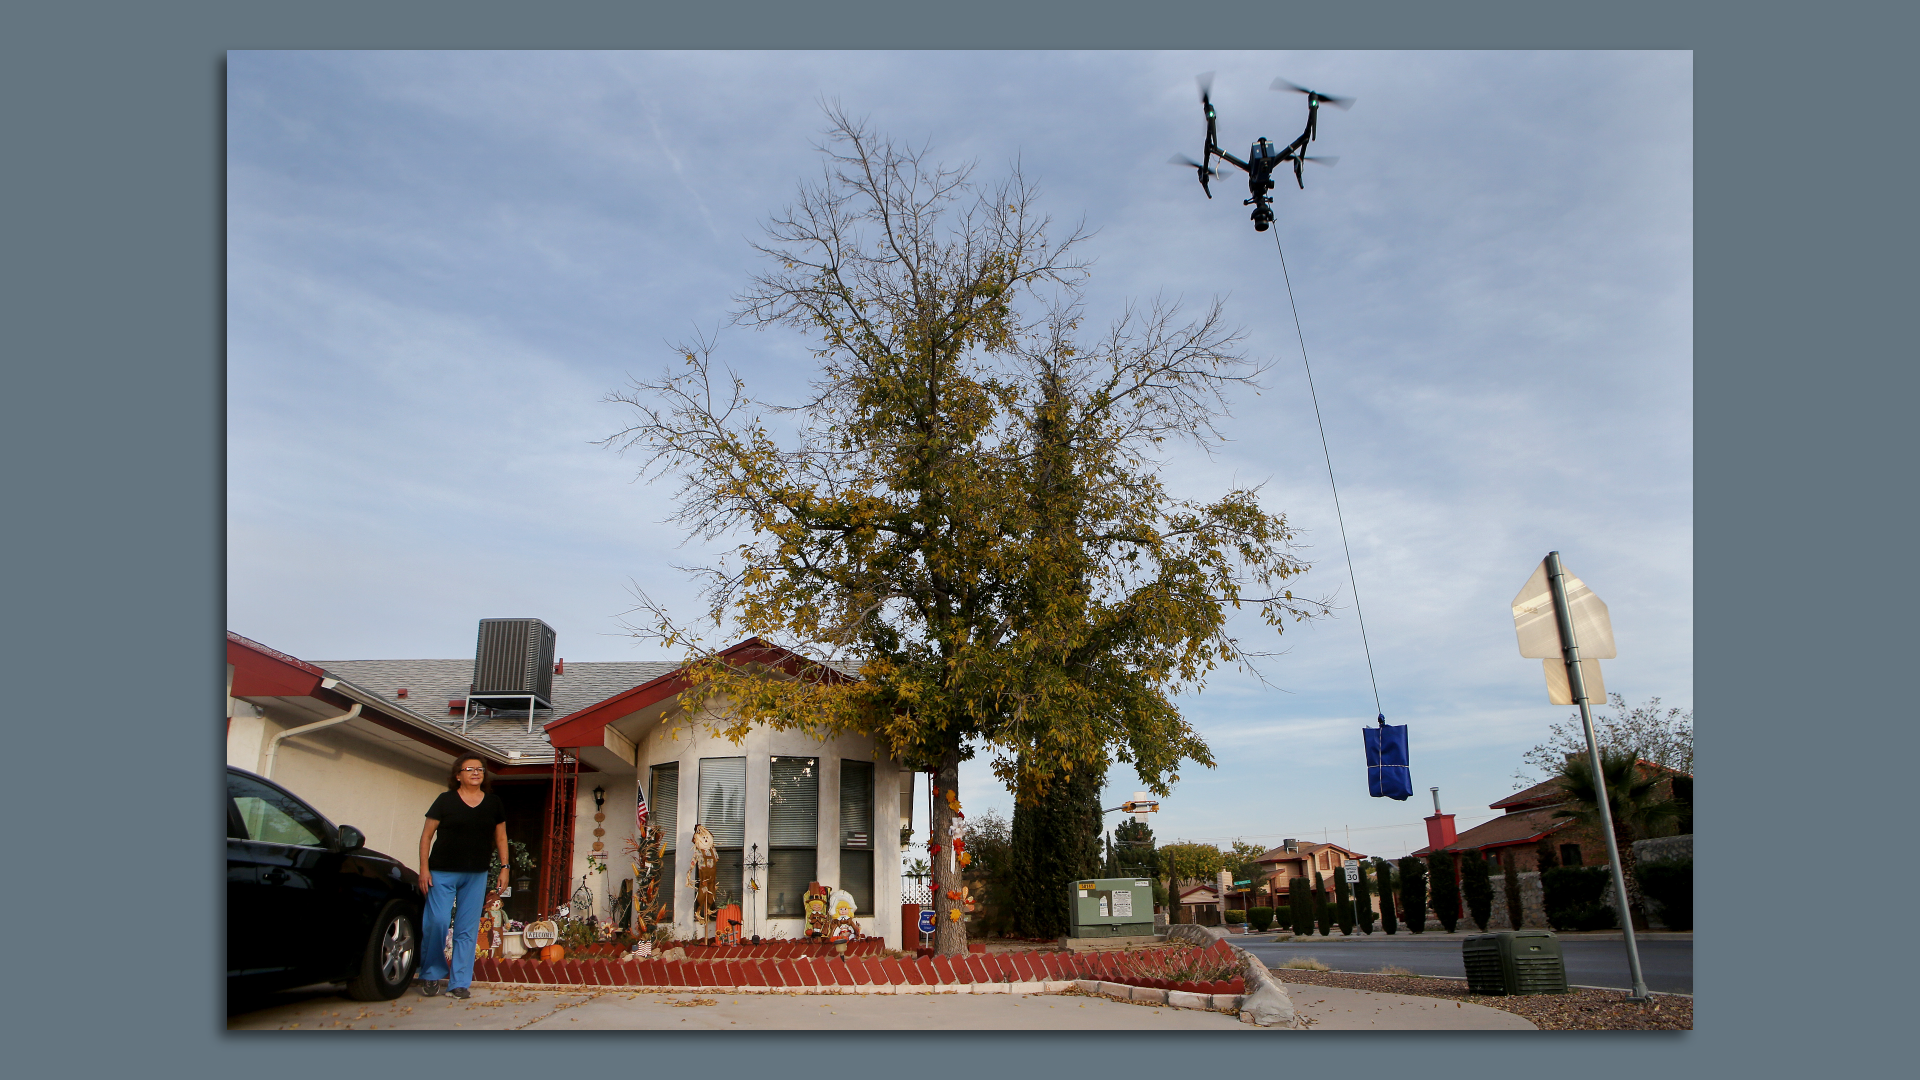 A resident of El Paso, Texas awaits a drone delivery outside her home.